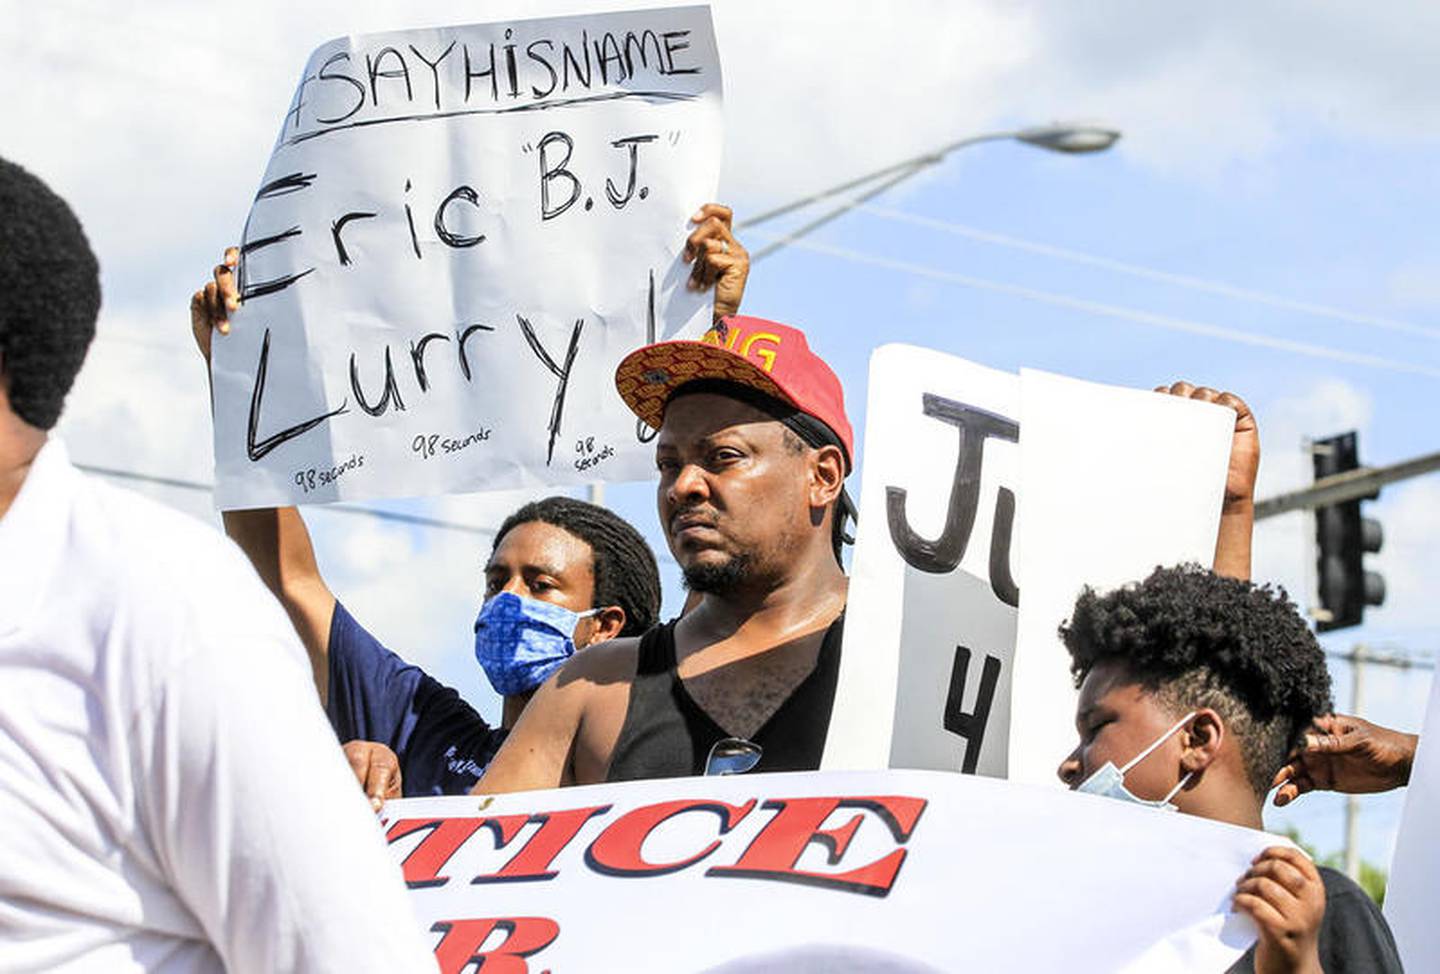 Protestors can be seen demonstrating against police brutality and justice for Eric Lurry on Sunday, Jul. 26, 2020, at the corner of Larkin Avenue and Jefferson Street in Joliet, Ill.